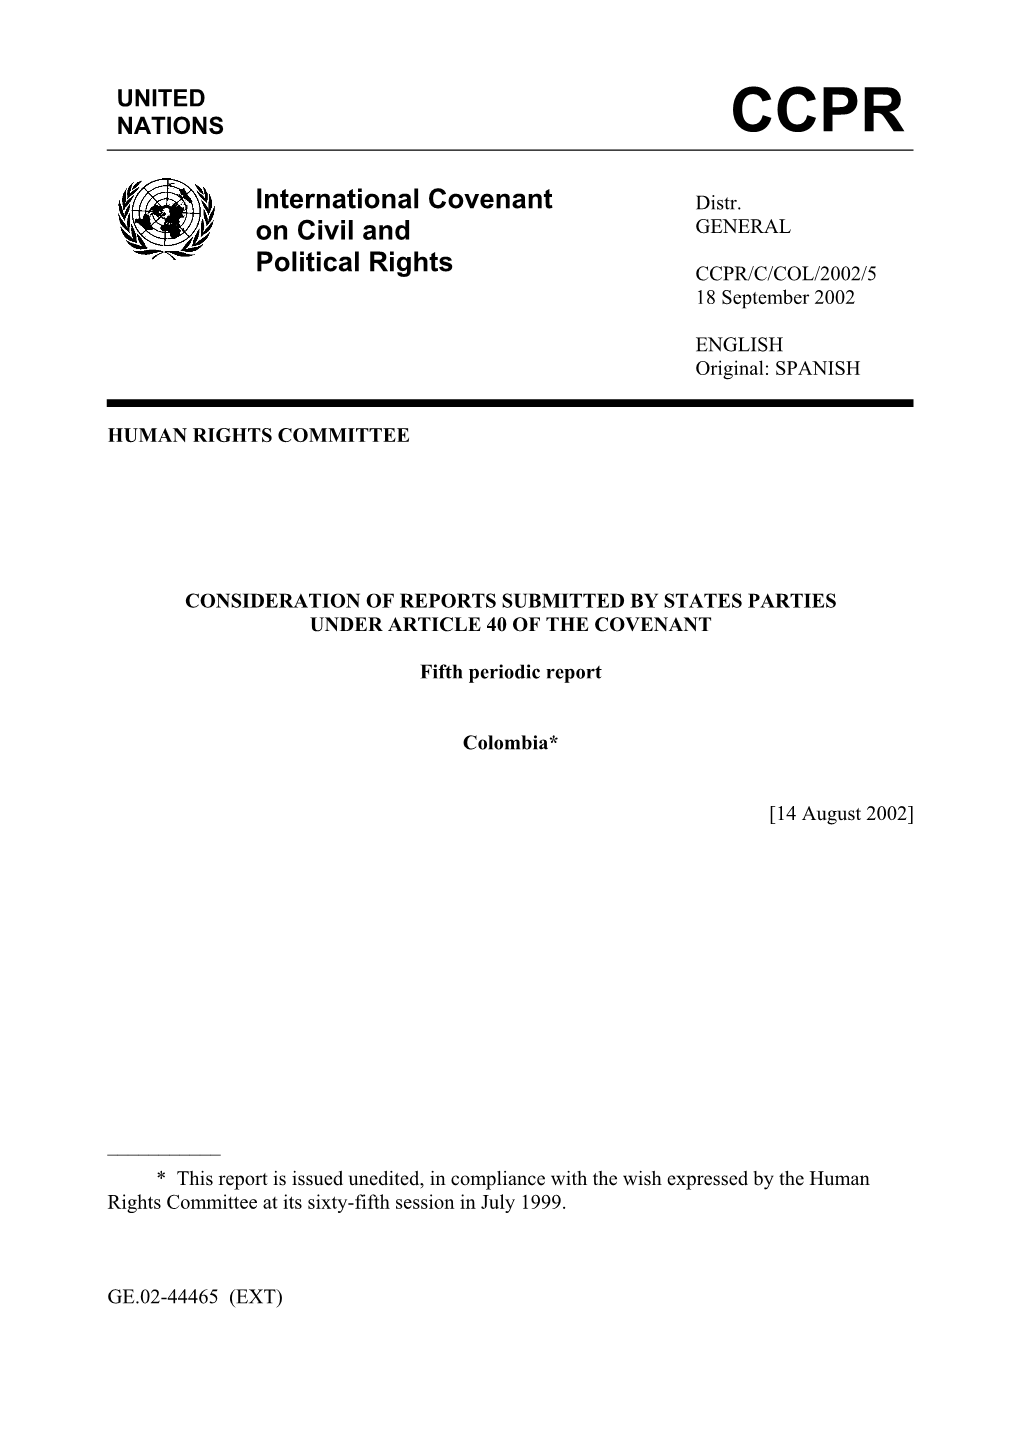 International Covenant on Civil and Political Rights on 9 July 1996